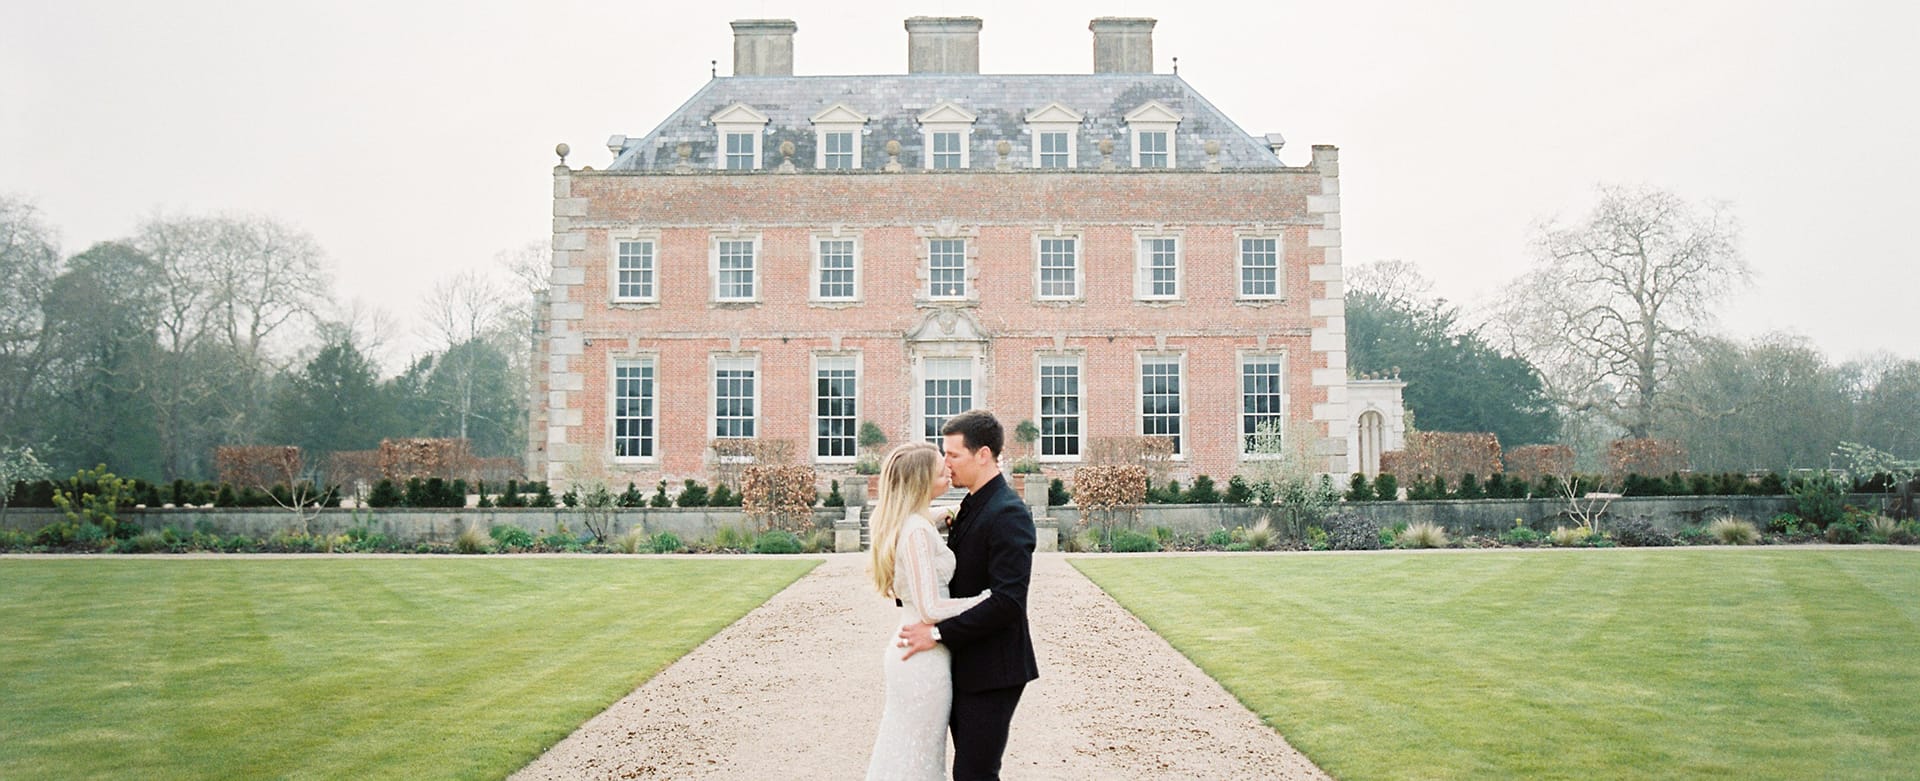 15 of the Best Country House Wedding Venues